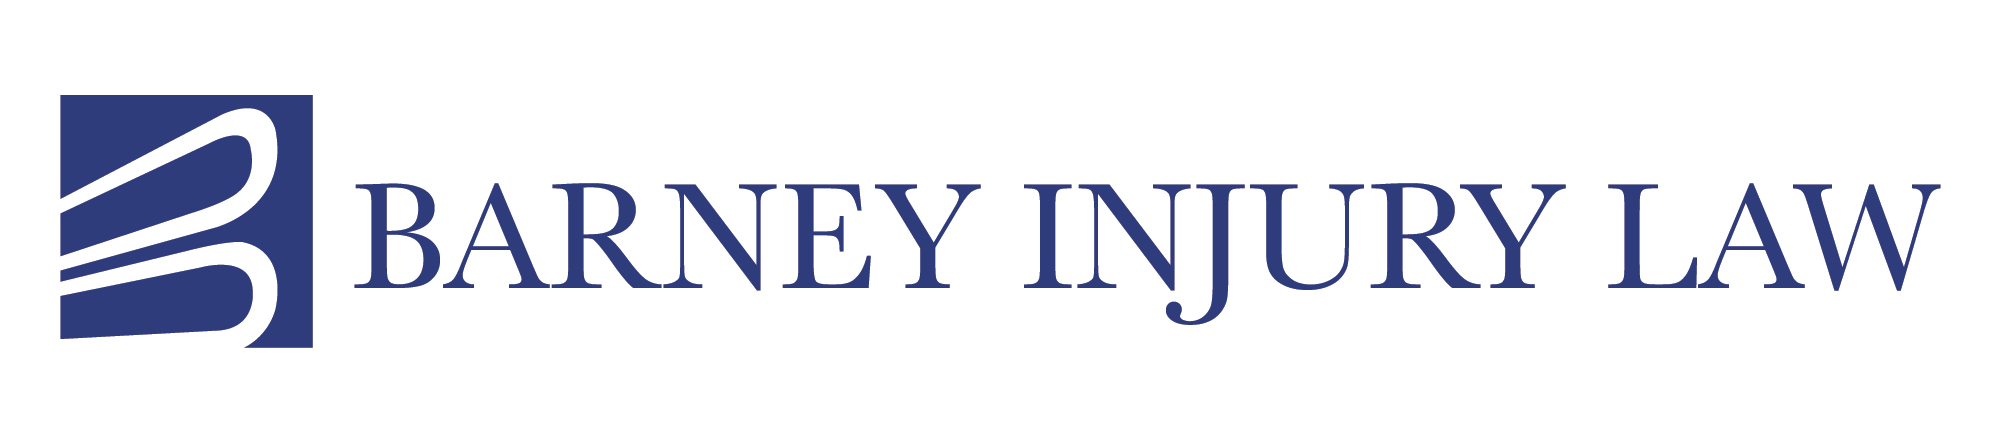 Barney Injury Law Wins 2 Major Personal Injury Accident Cases in Virginia Beach